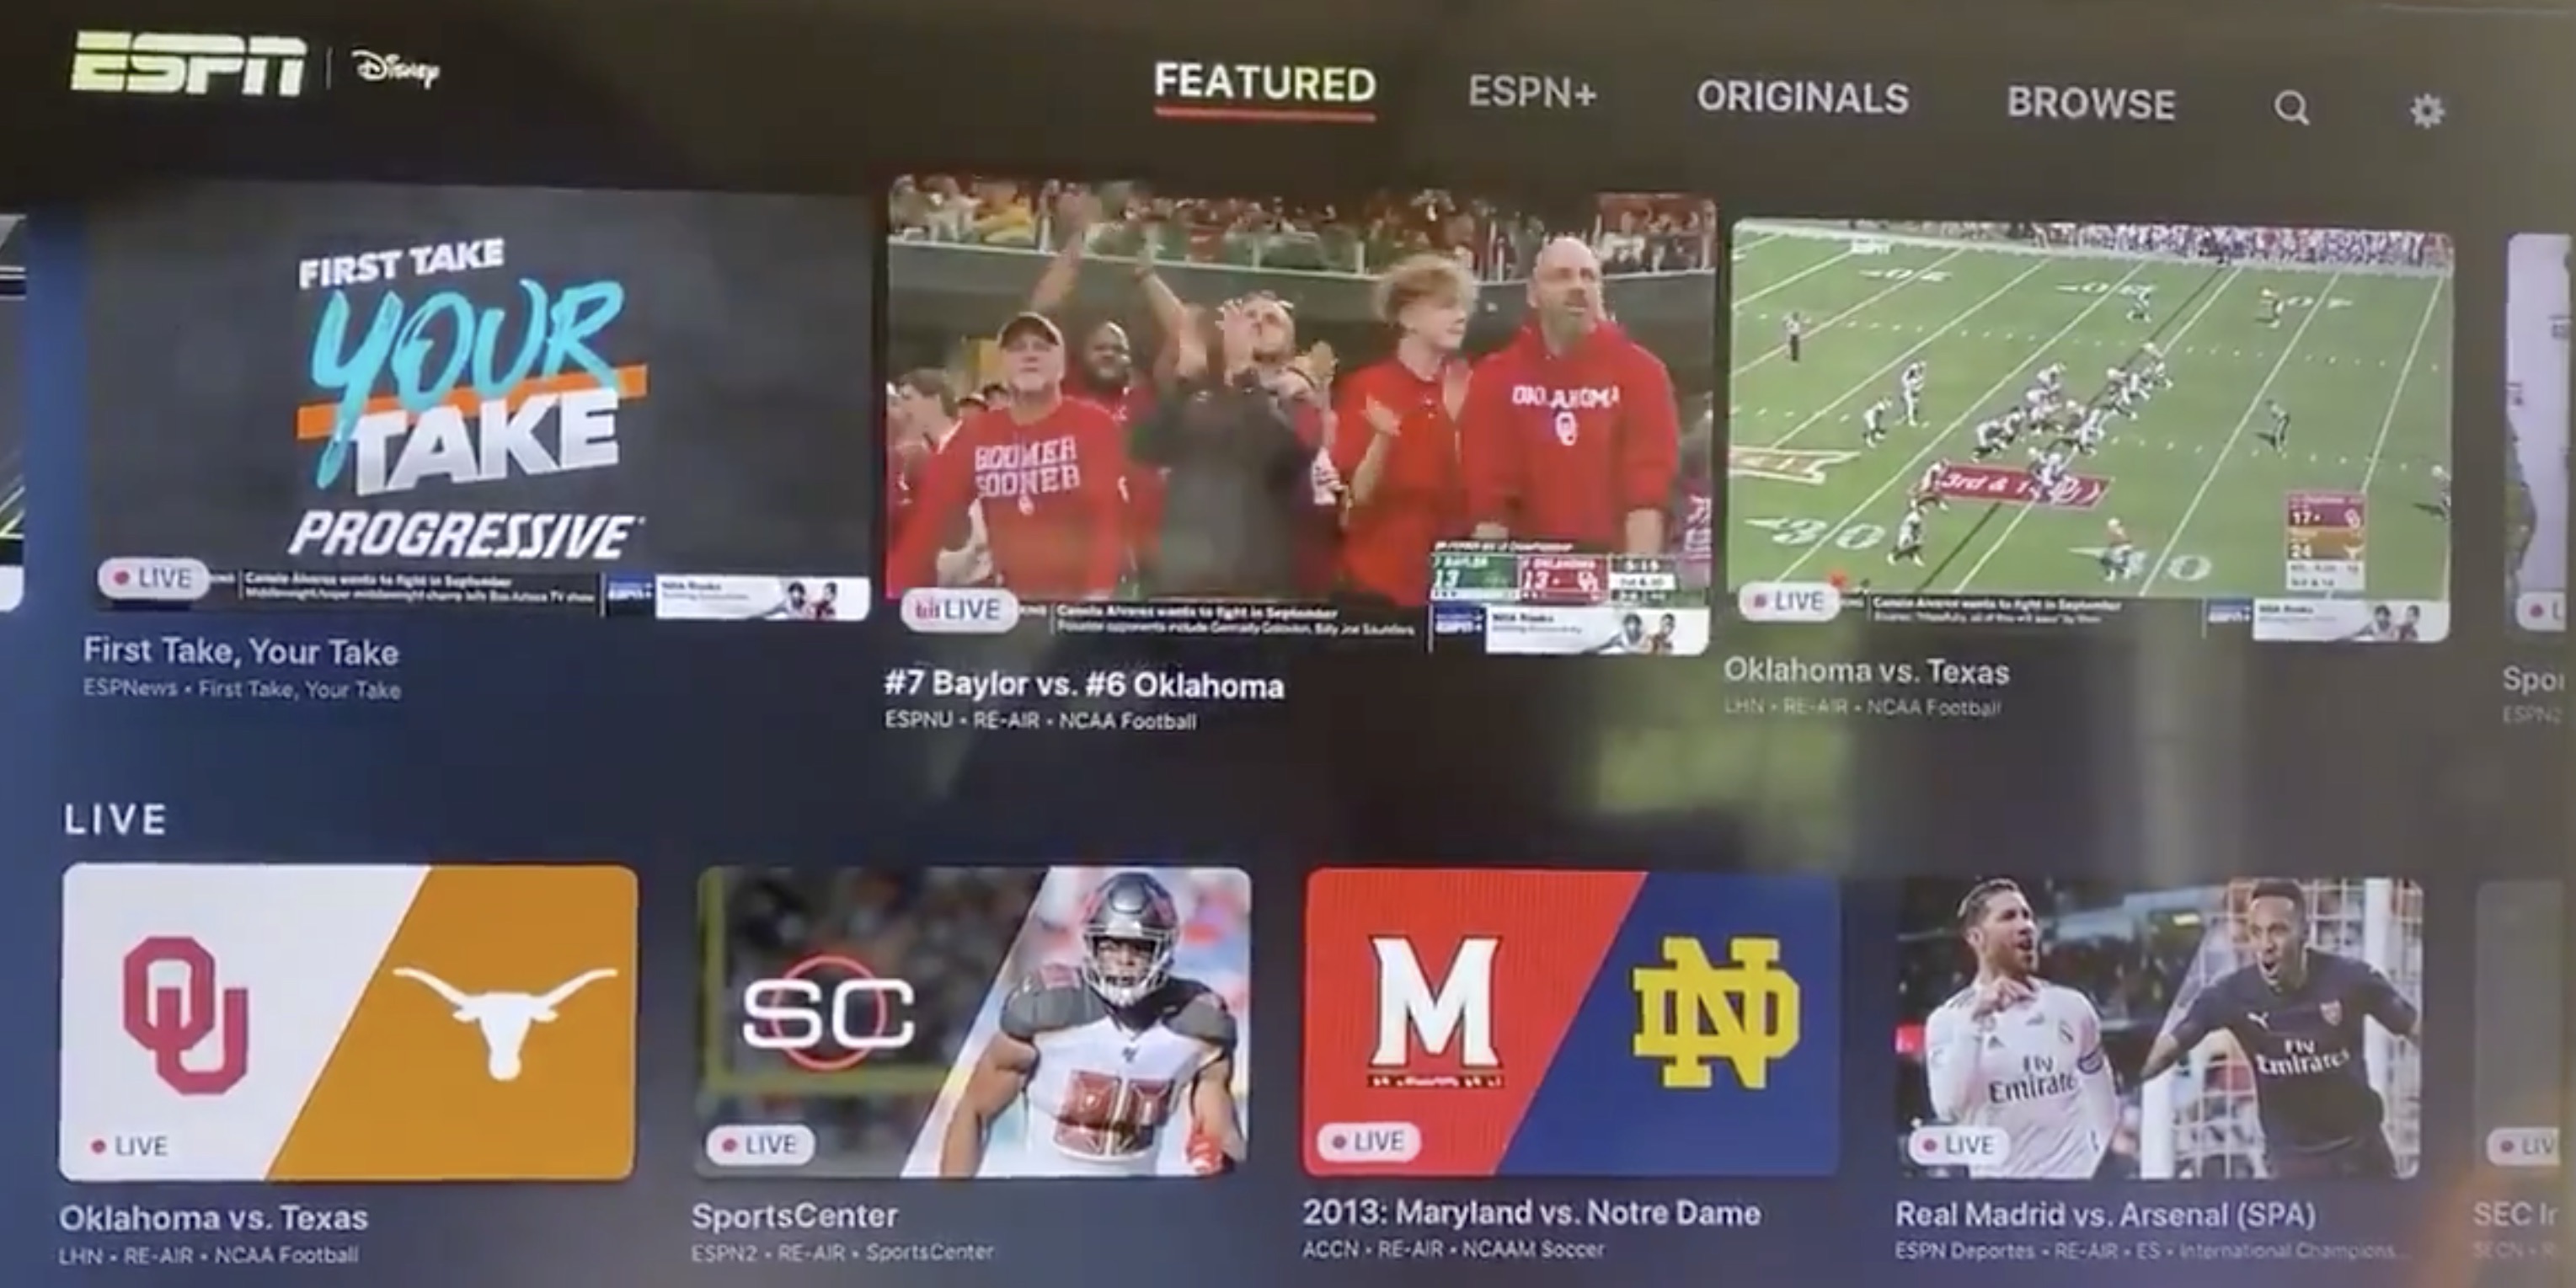 Espn For Apple Tv Now Lets You Auto Play 3 Live Games Channels At Once On Home Screen 9to5mac